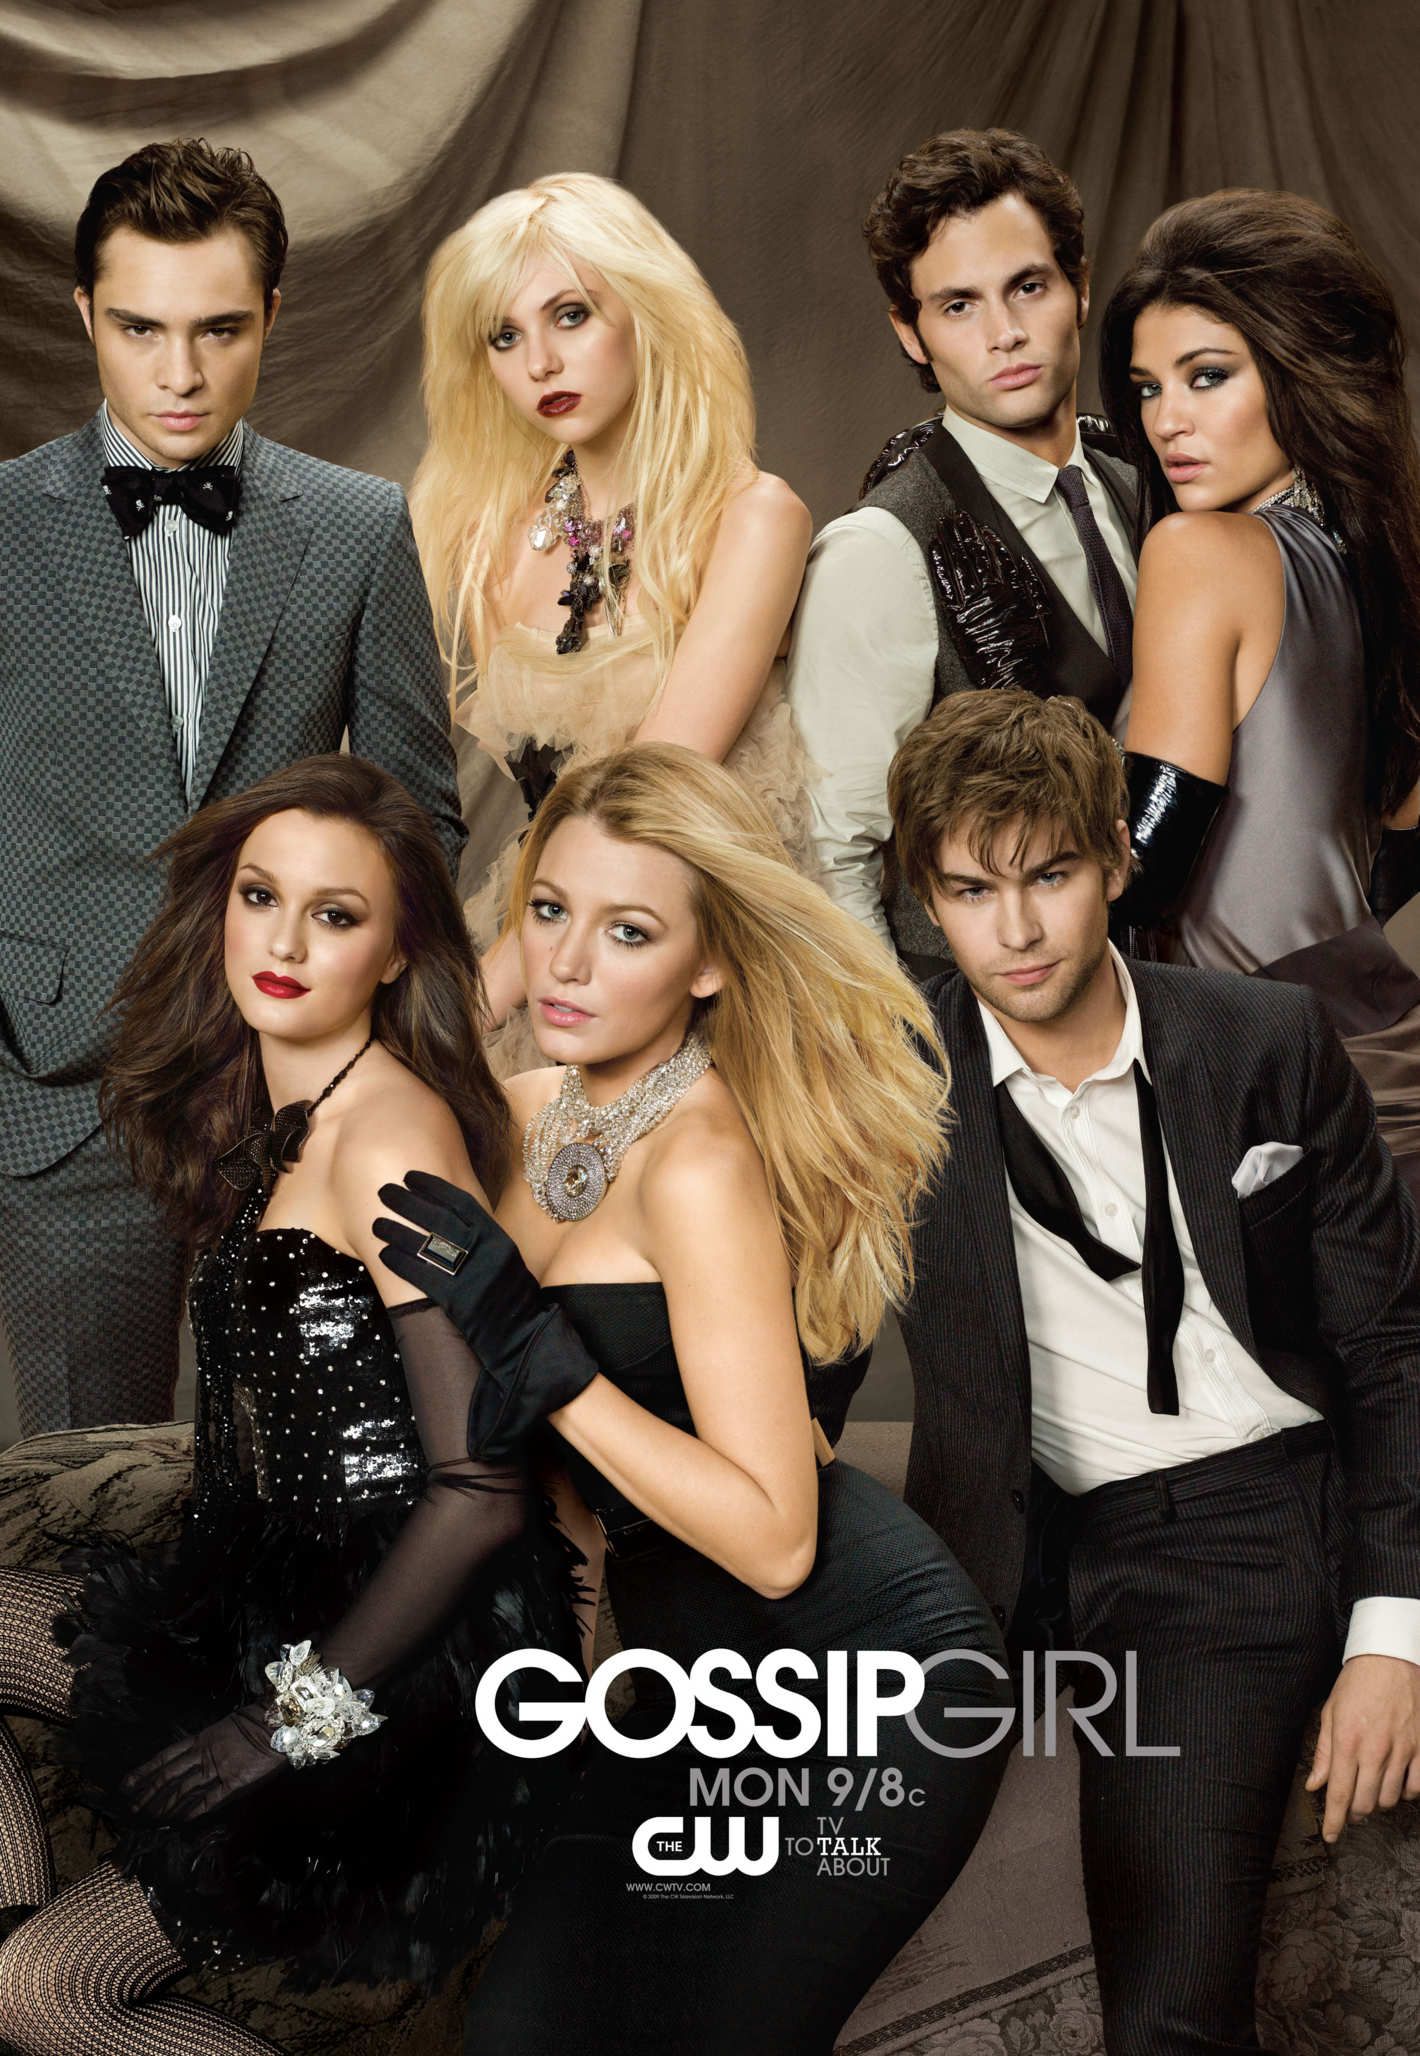 8 Questions About this Gossip Girl Photo - Gossip Girl Throwback